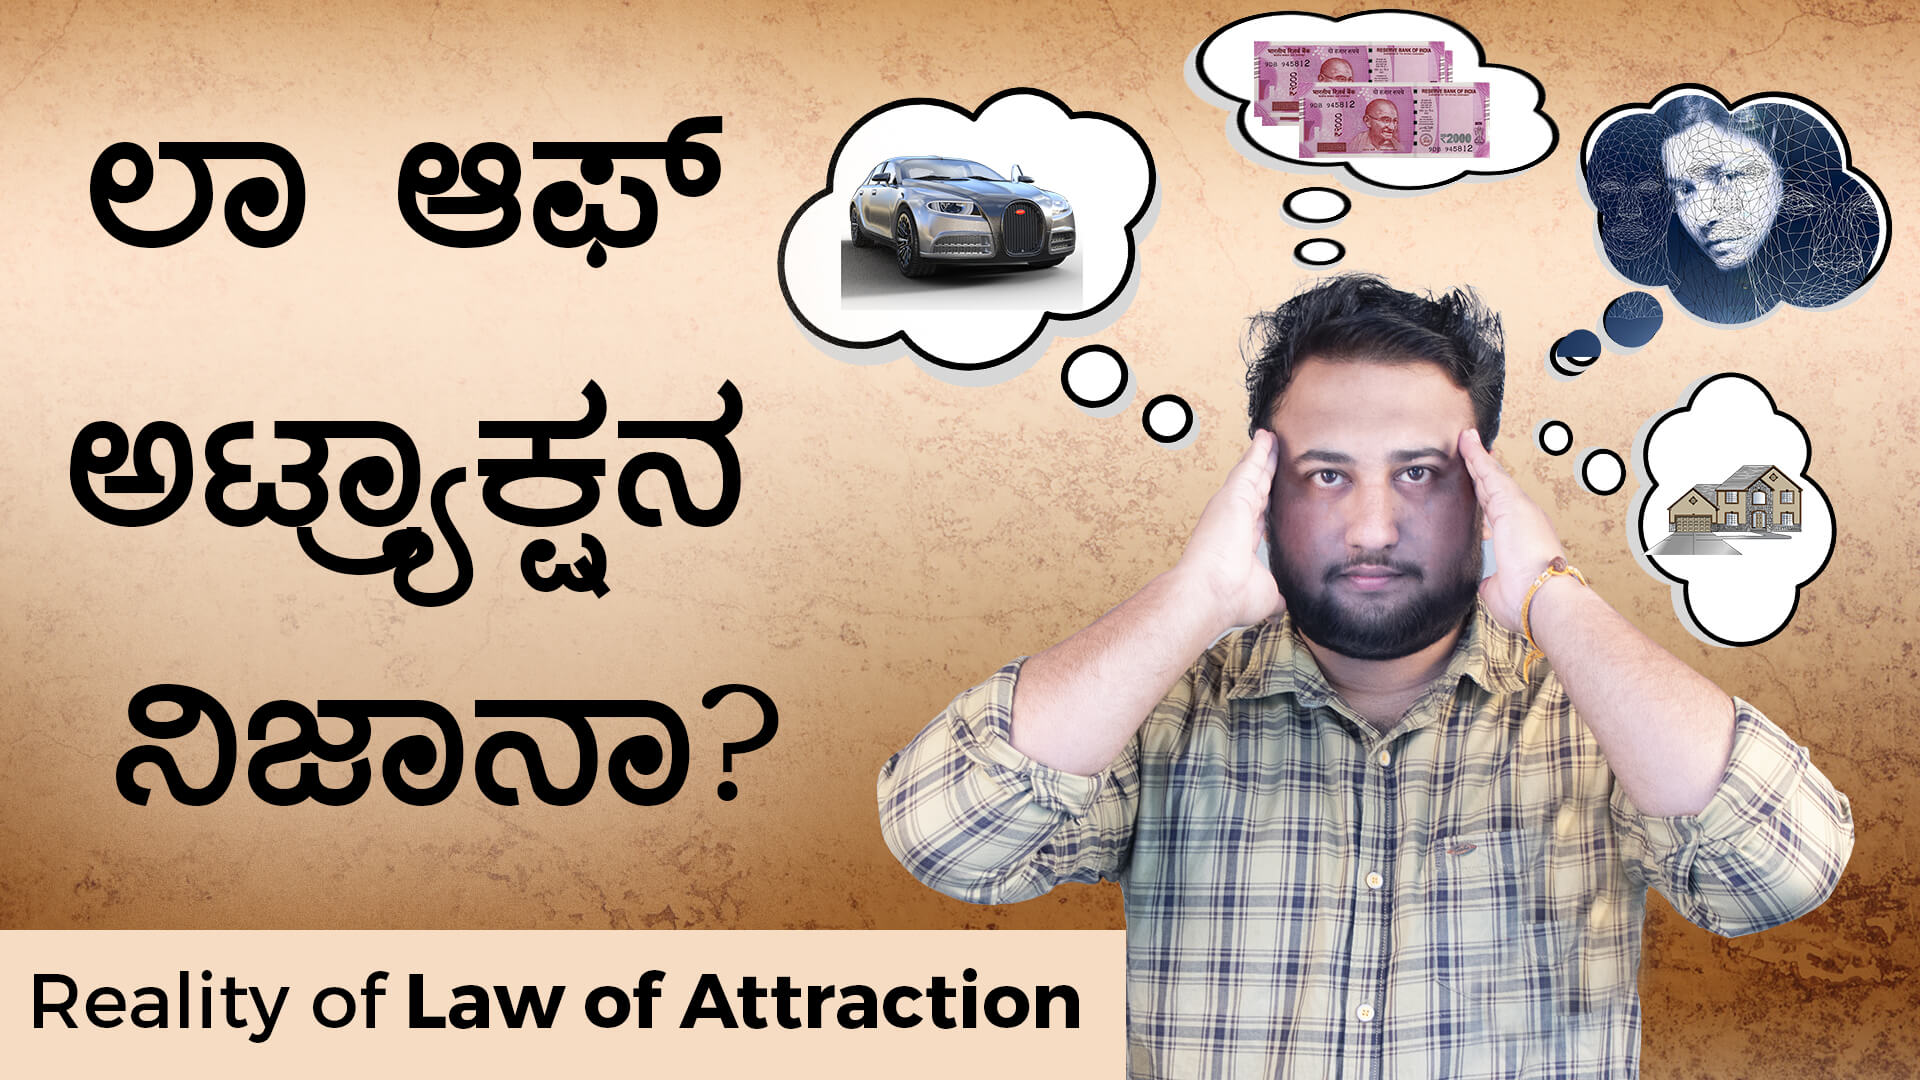 You are currently viewing ಲಾ ಆಫ್ ಅಟ್ರ್ಯಾಕ್ಷನನ ನೈಜತೆ – Reality of Law of Attraction in Kannada